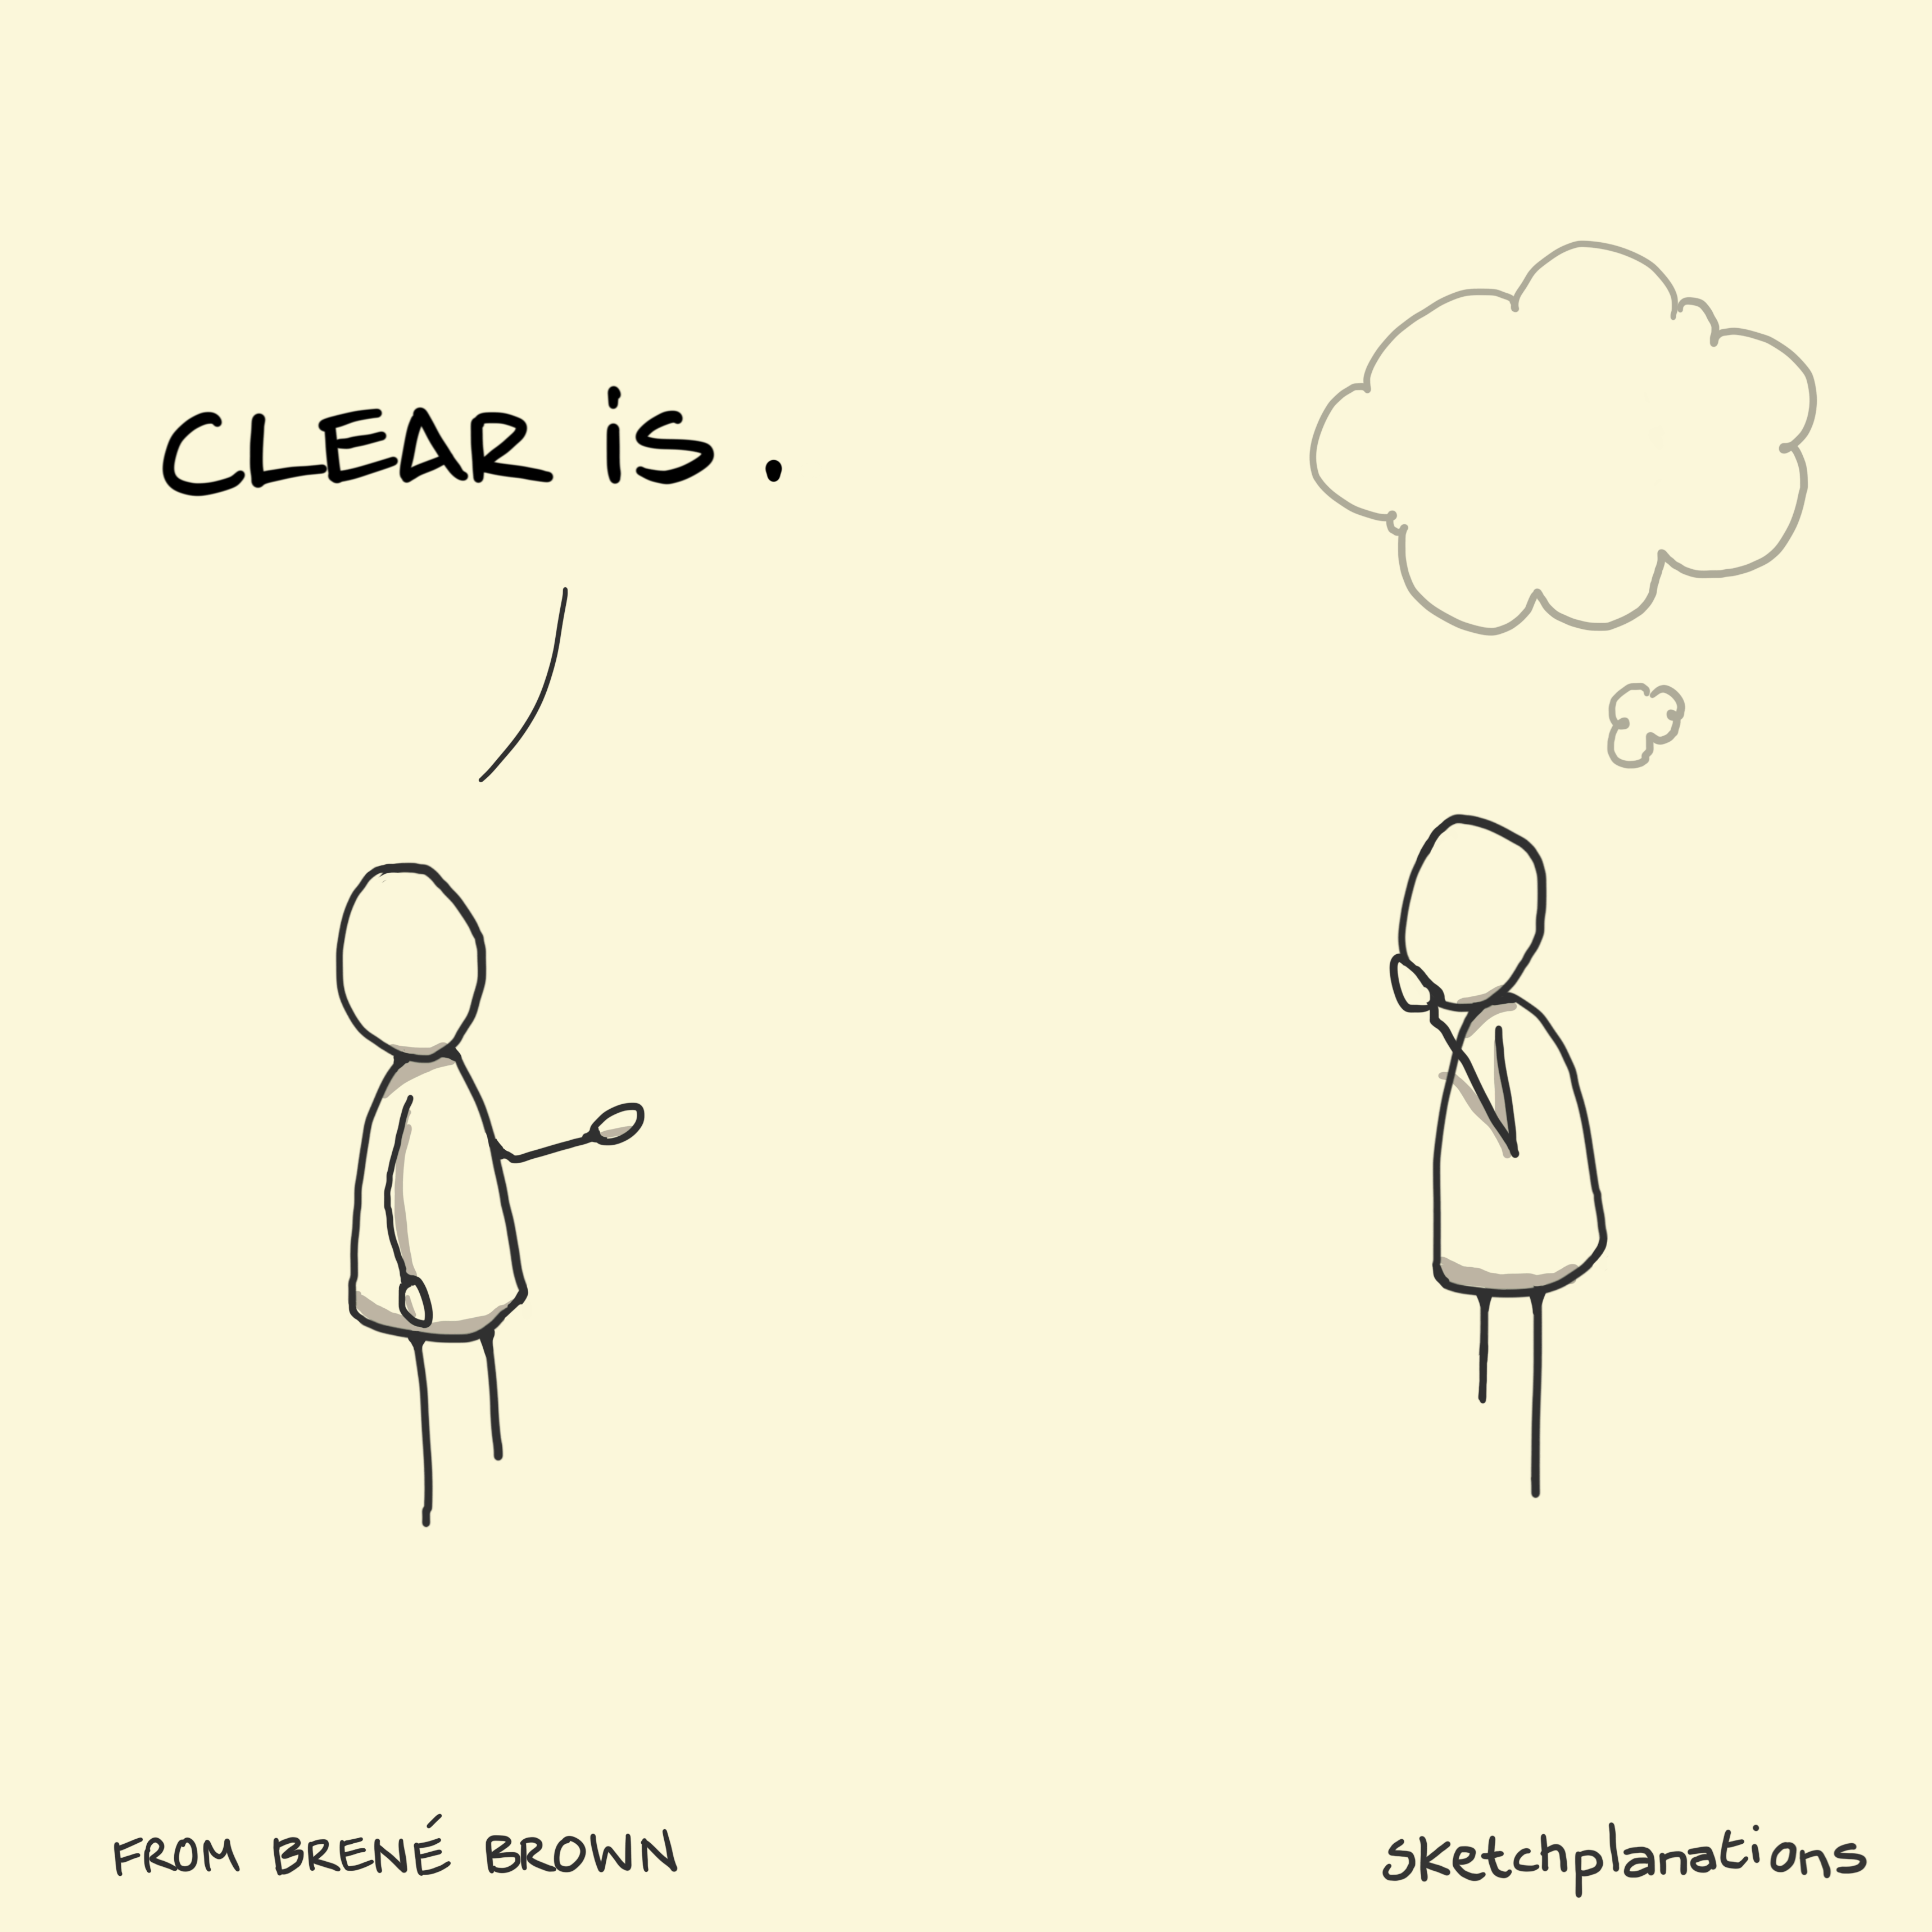 Clear is kind - Sketchplanations